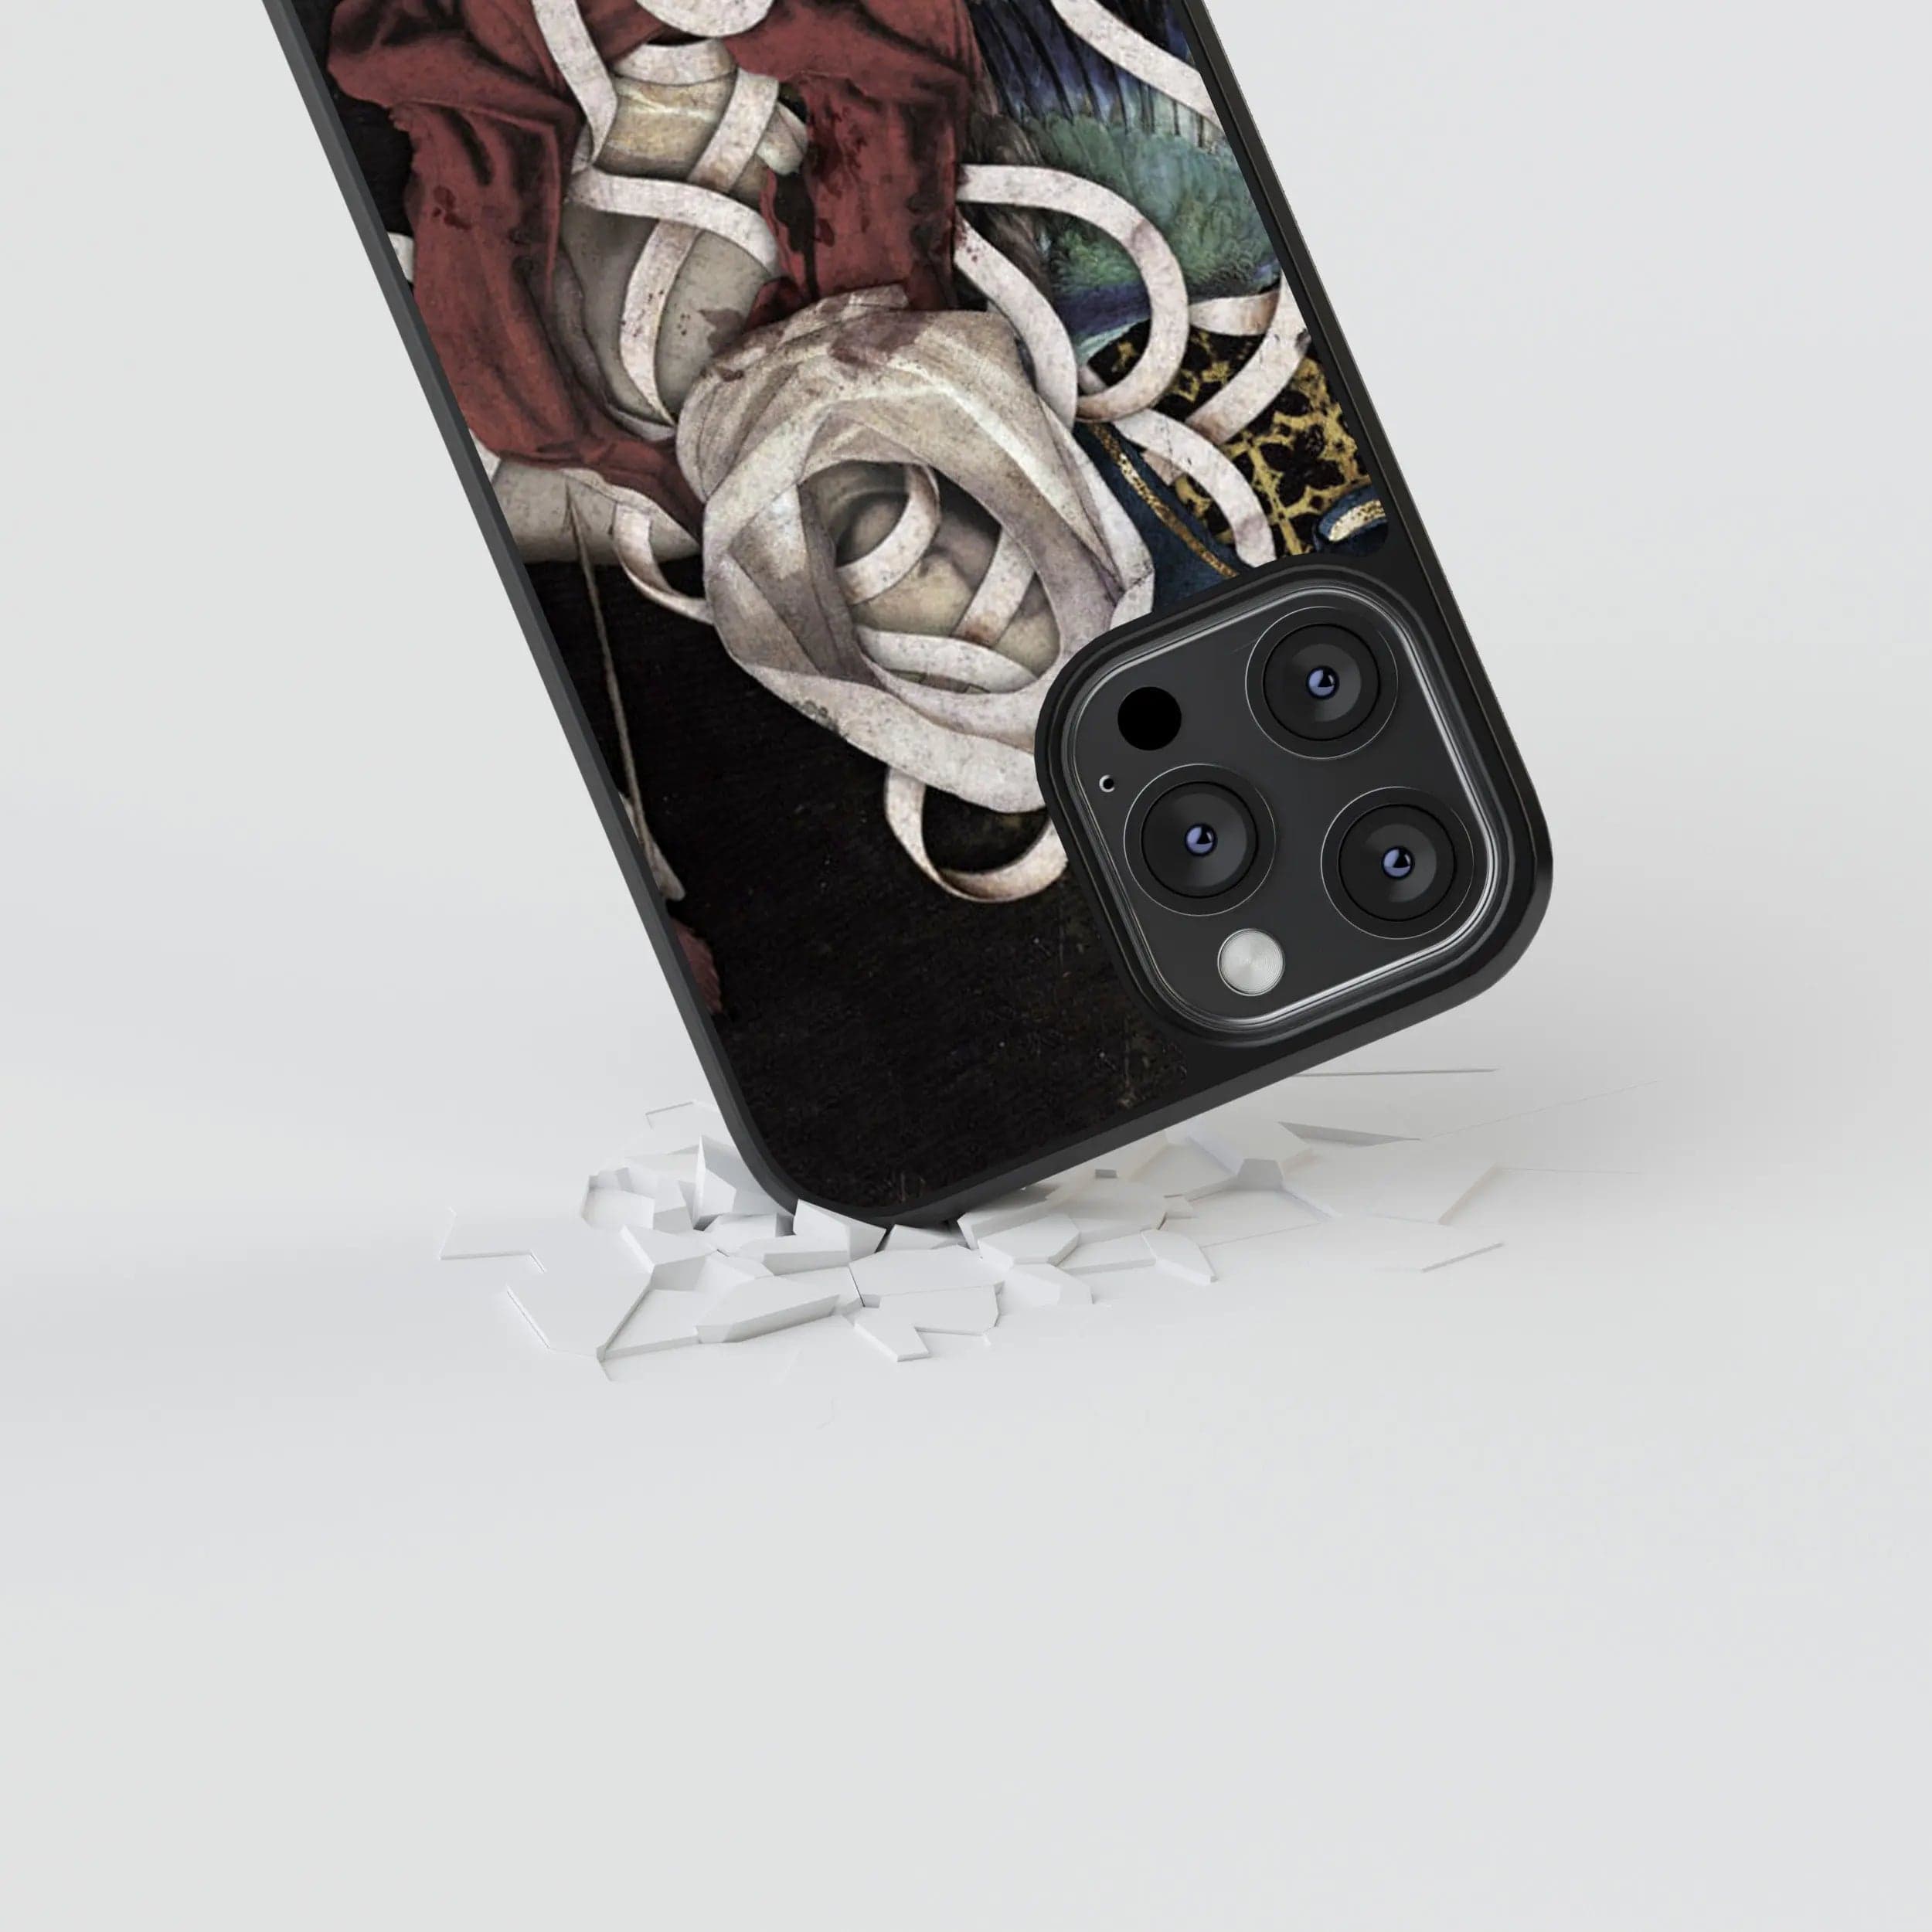 Phone case "Art collage" My Store